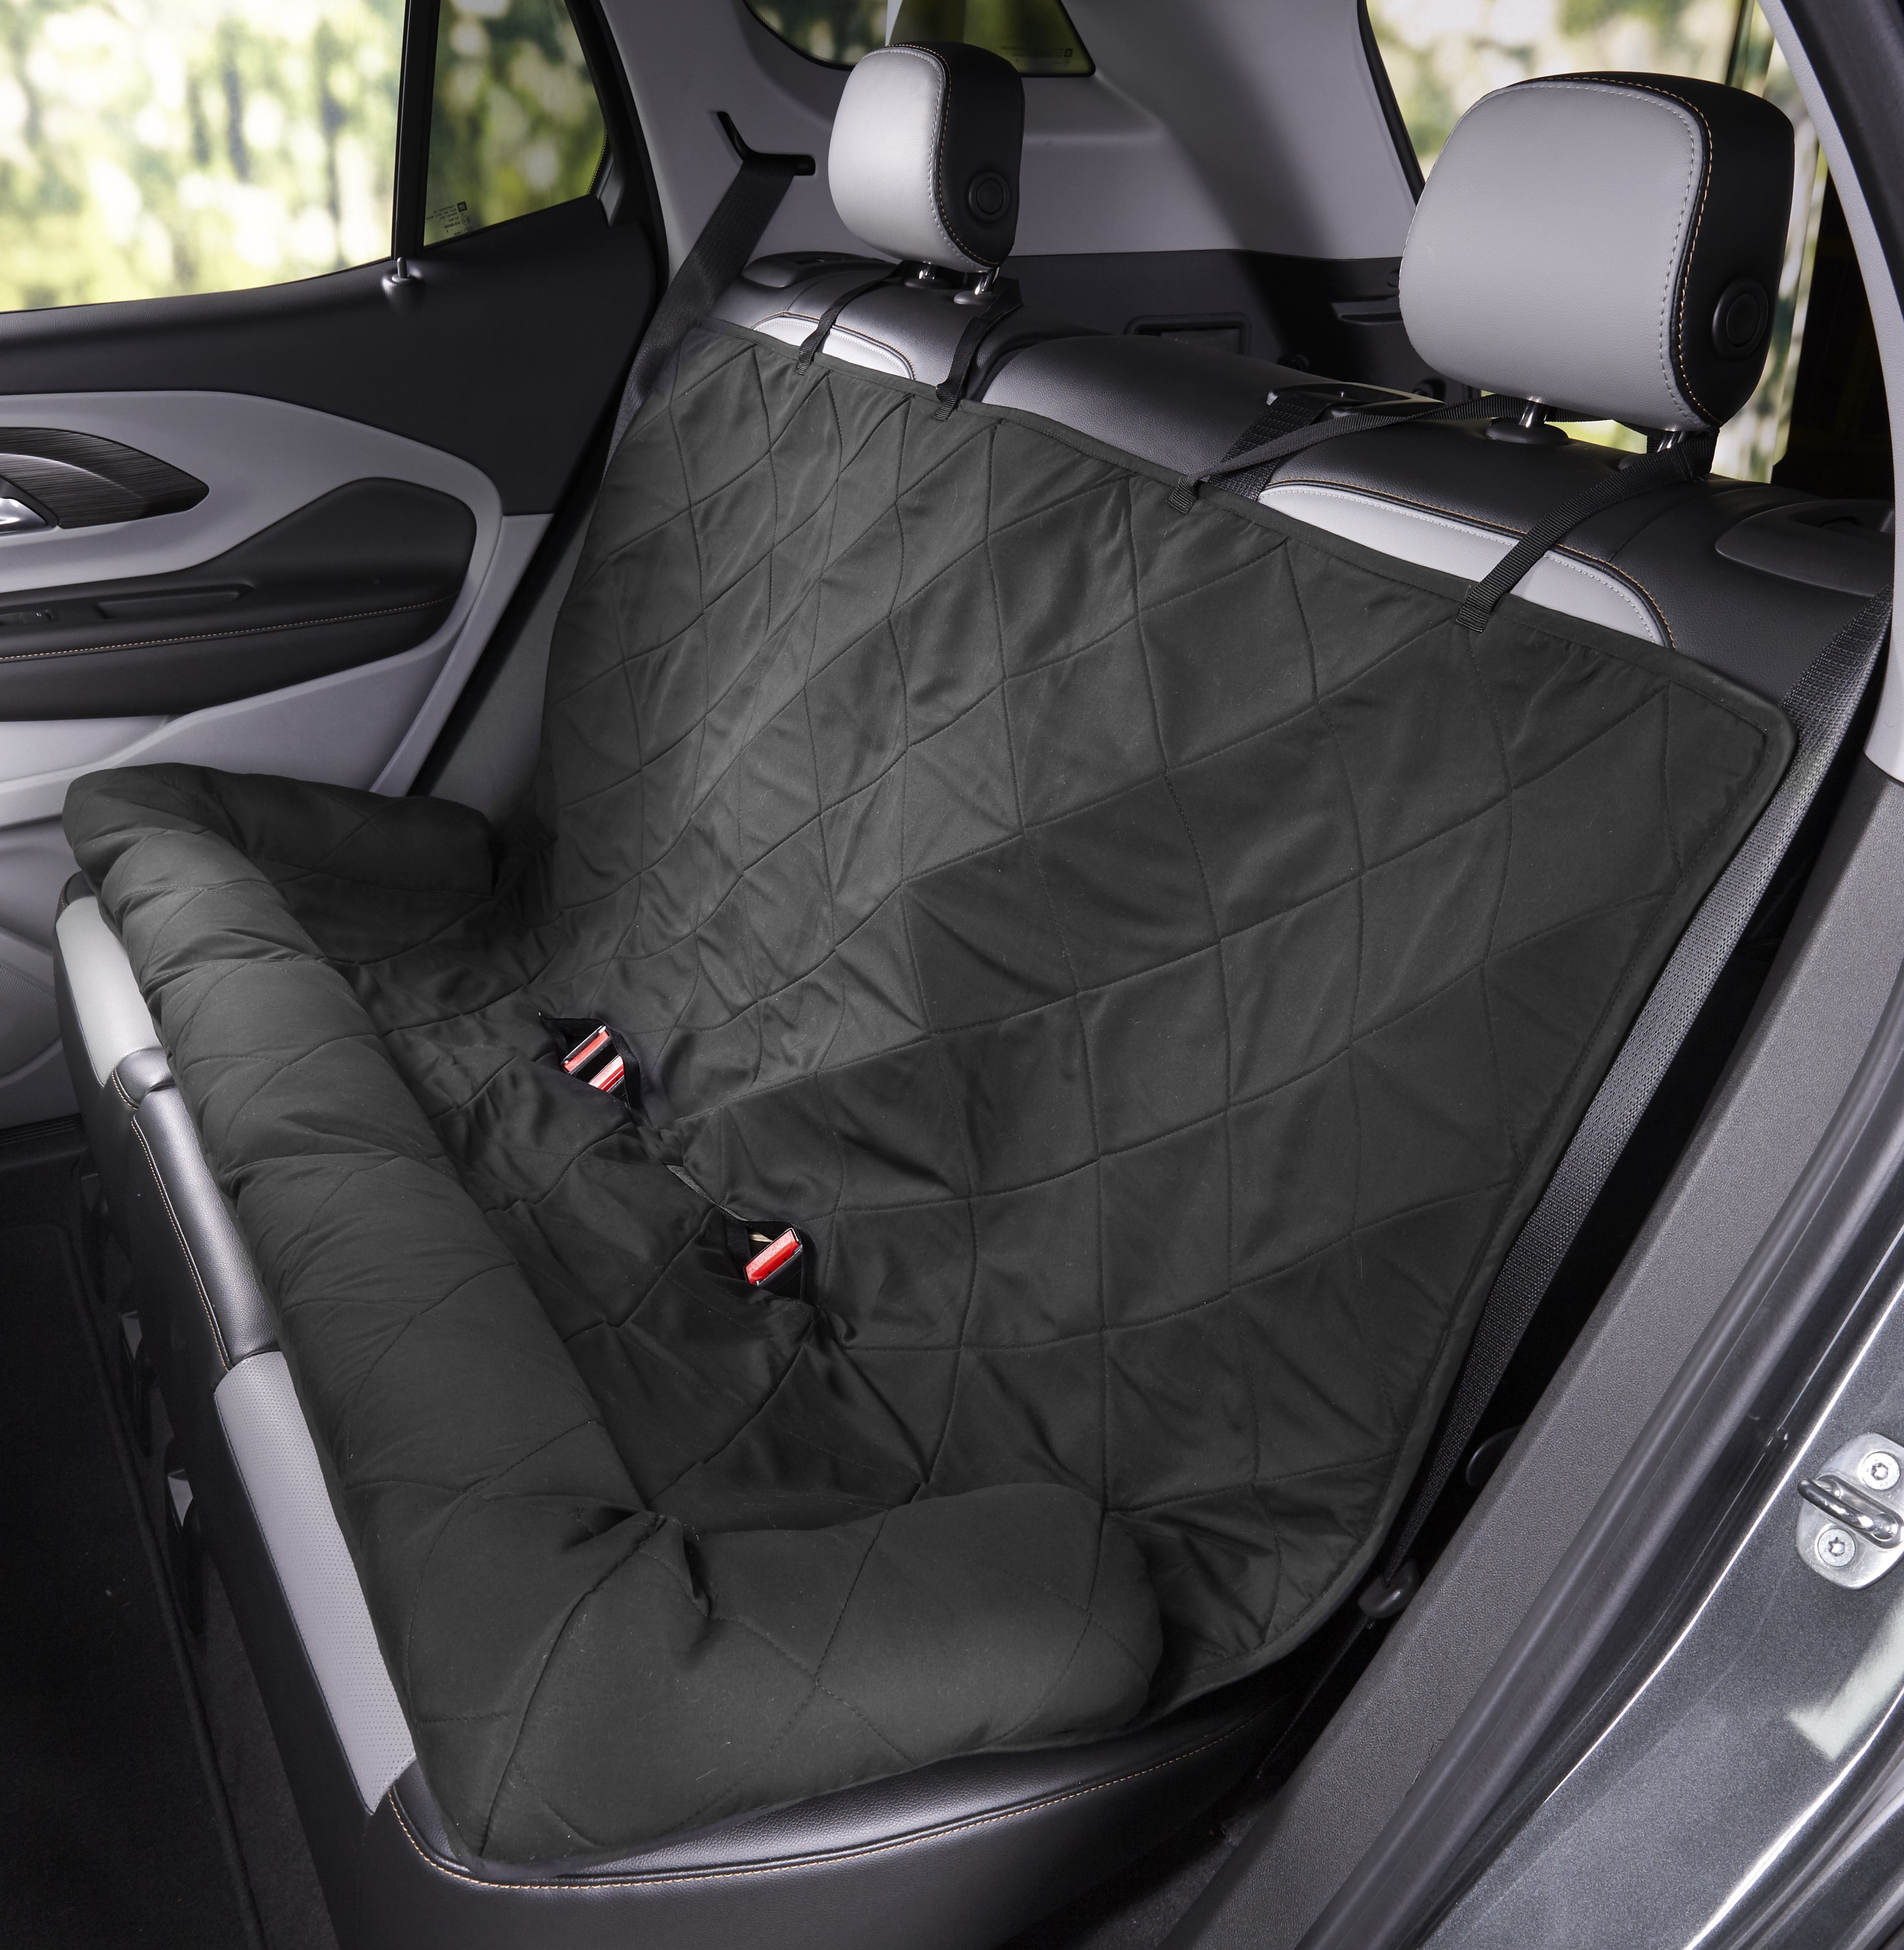 FORD PREMIUM CAR SEAT COVER PROTECTOR 100% WATERPROOF HEAVY DUTY BLACK 